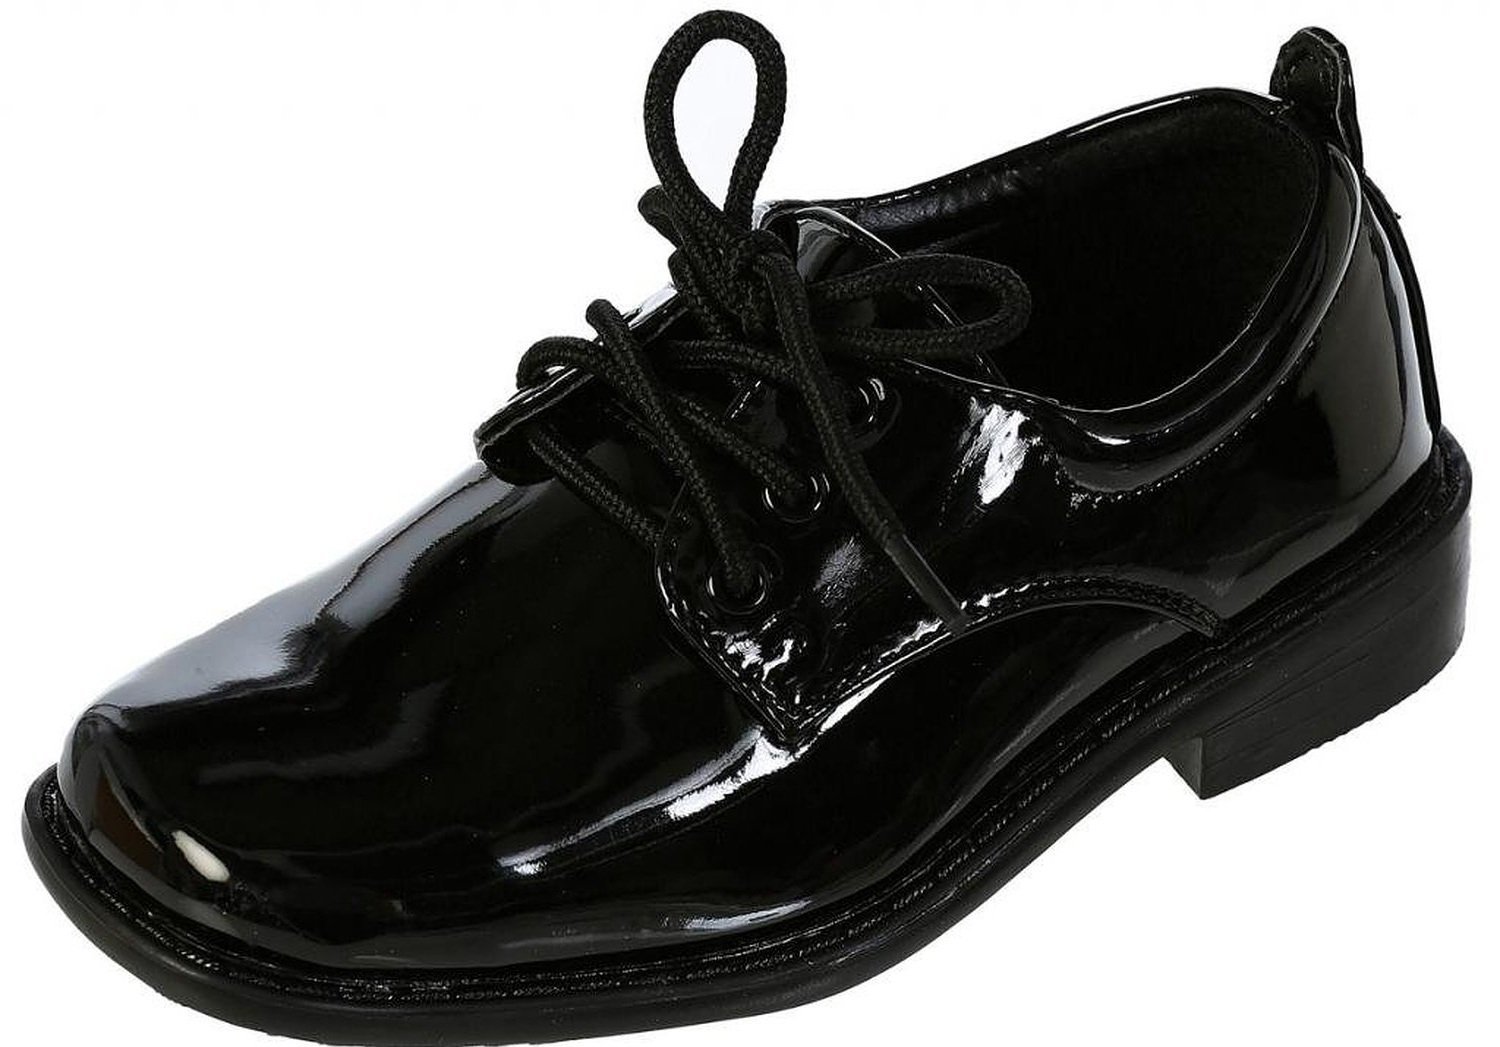 Boys Square Toe Lace Up Oxford Patent Dress Shoes - Available in Black 3 Little Kid